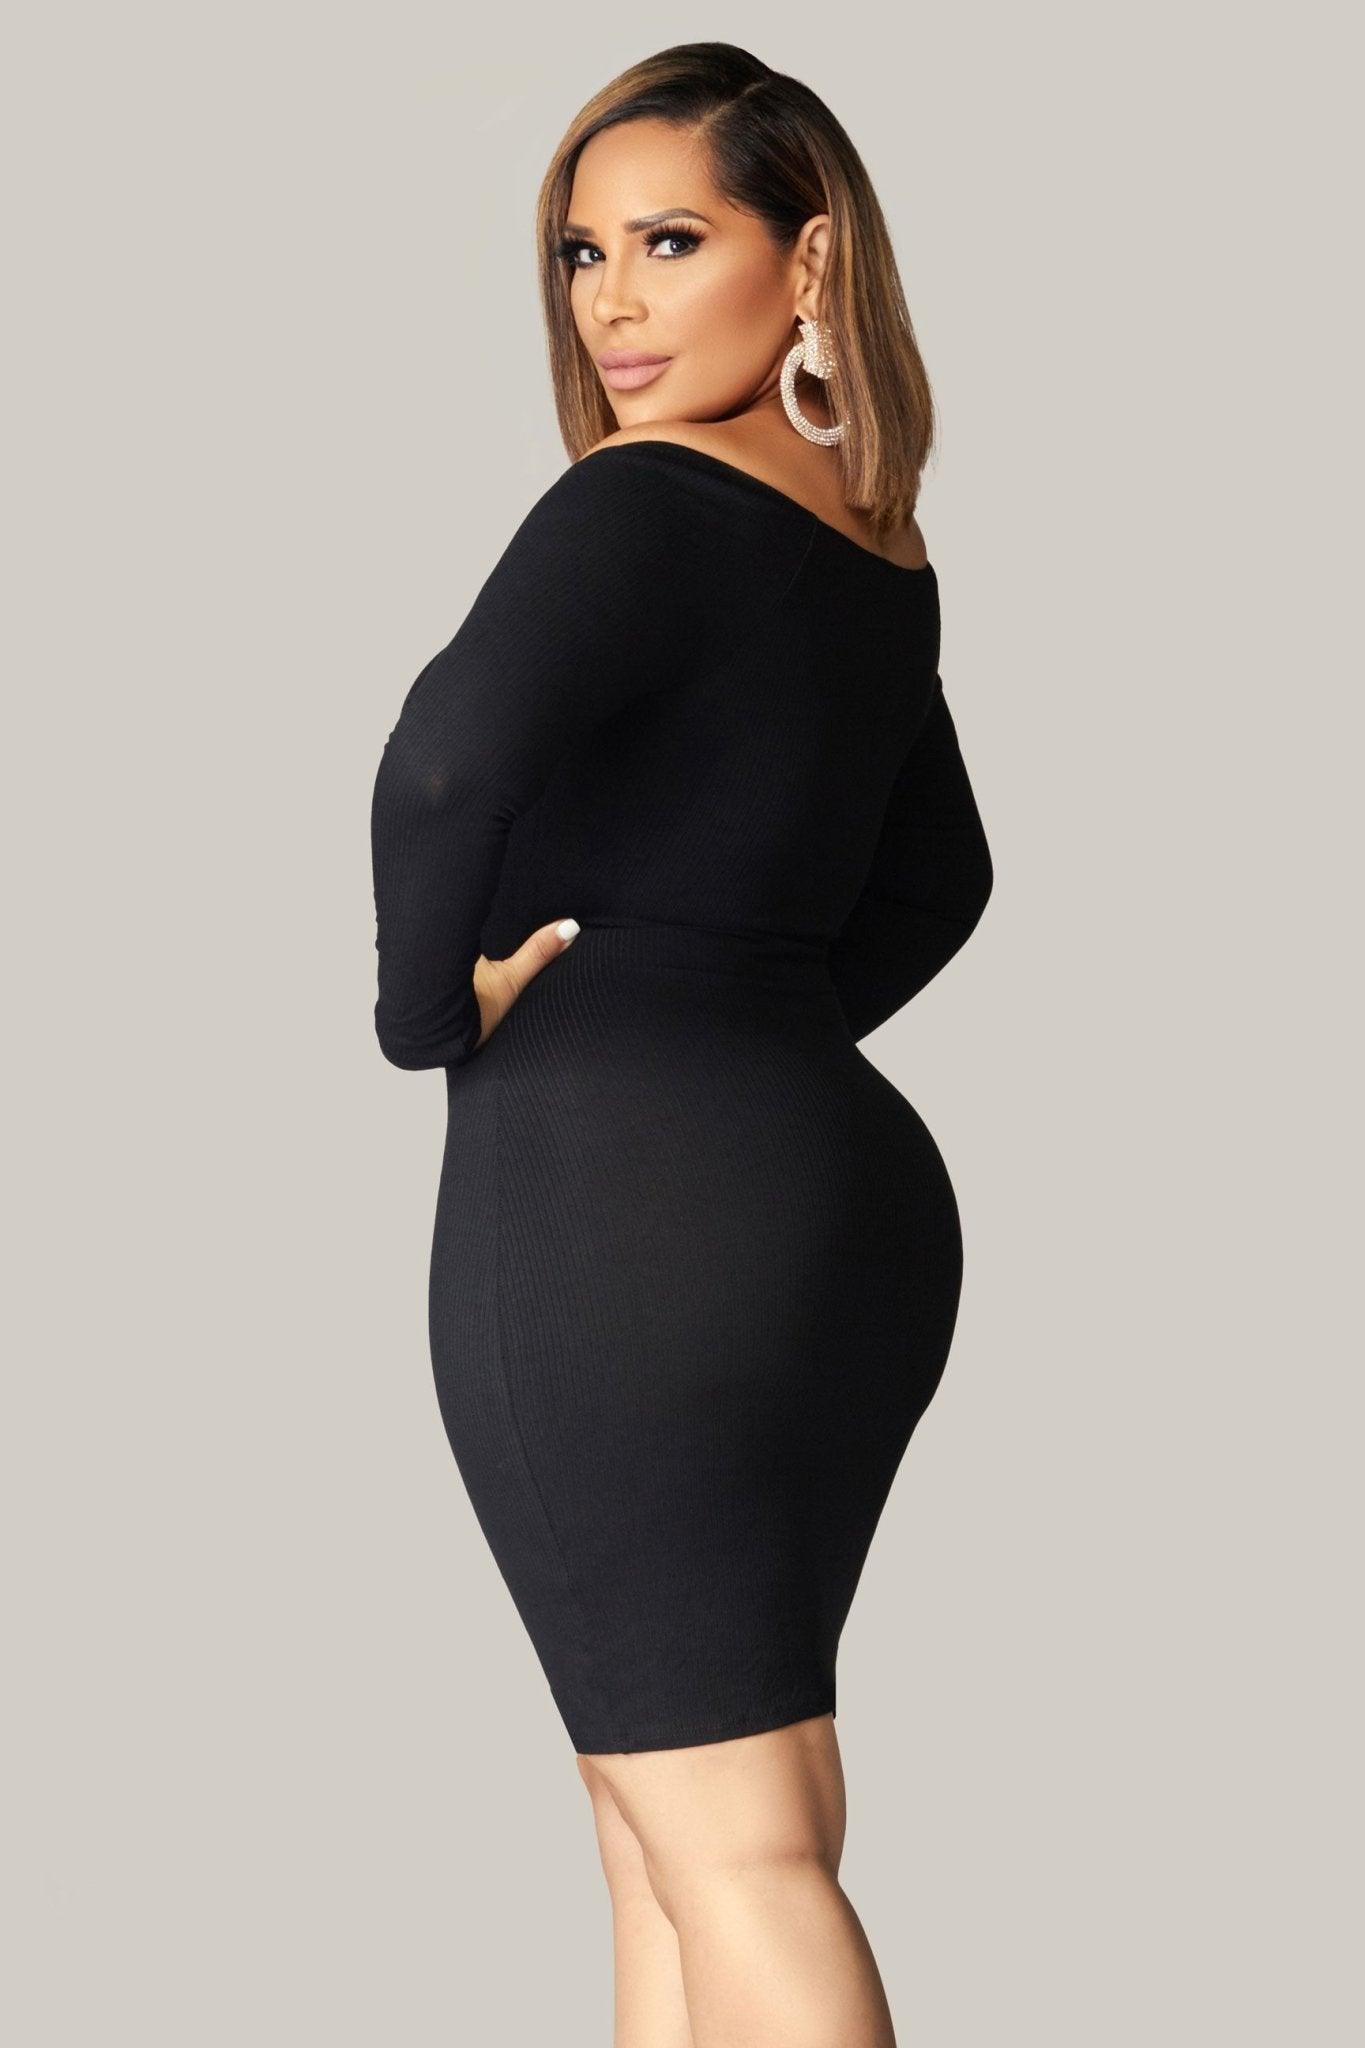 Presley Long Sleeve Square Neck Solid Ribbed Mini Dress - MY SEXY STYLES